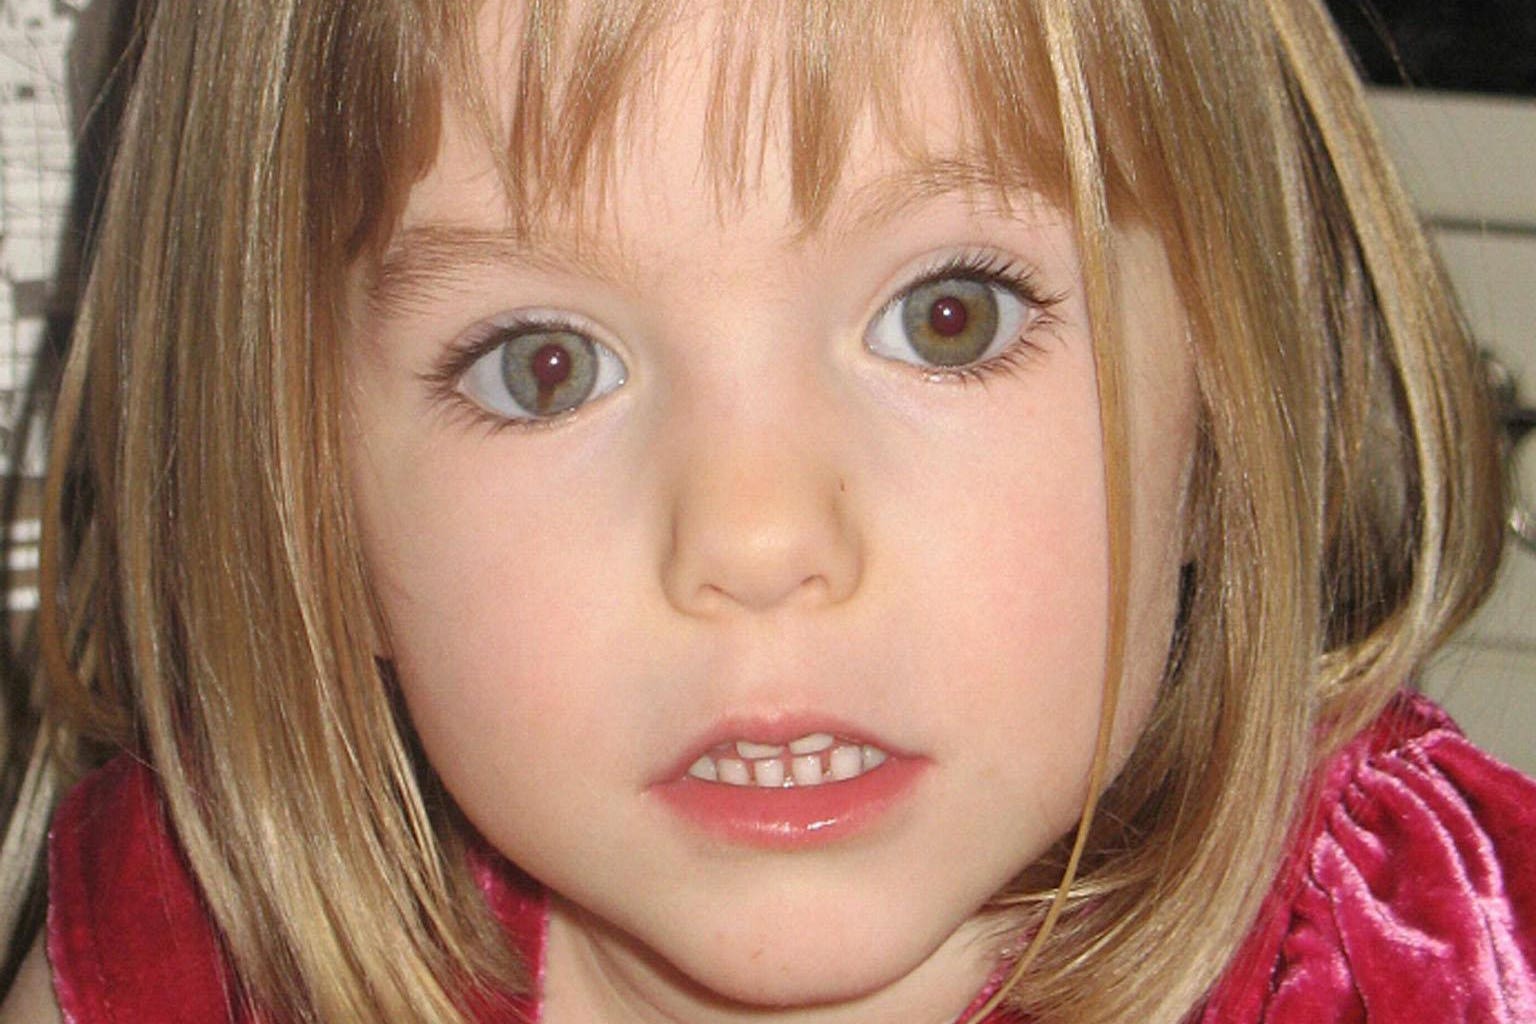 Madeleine disappeared in May 2007 while staying with her parents at a holiday apartment in Praia da Luz